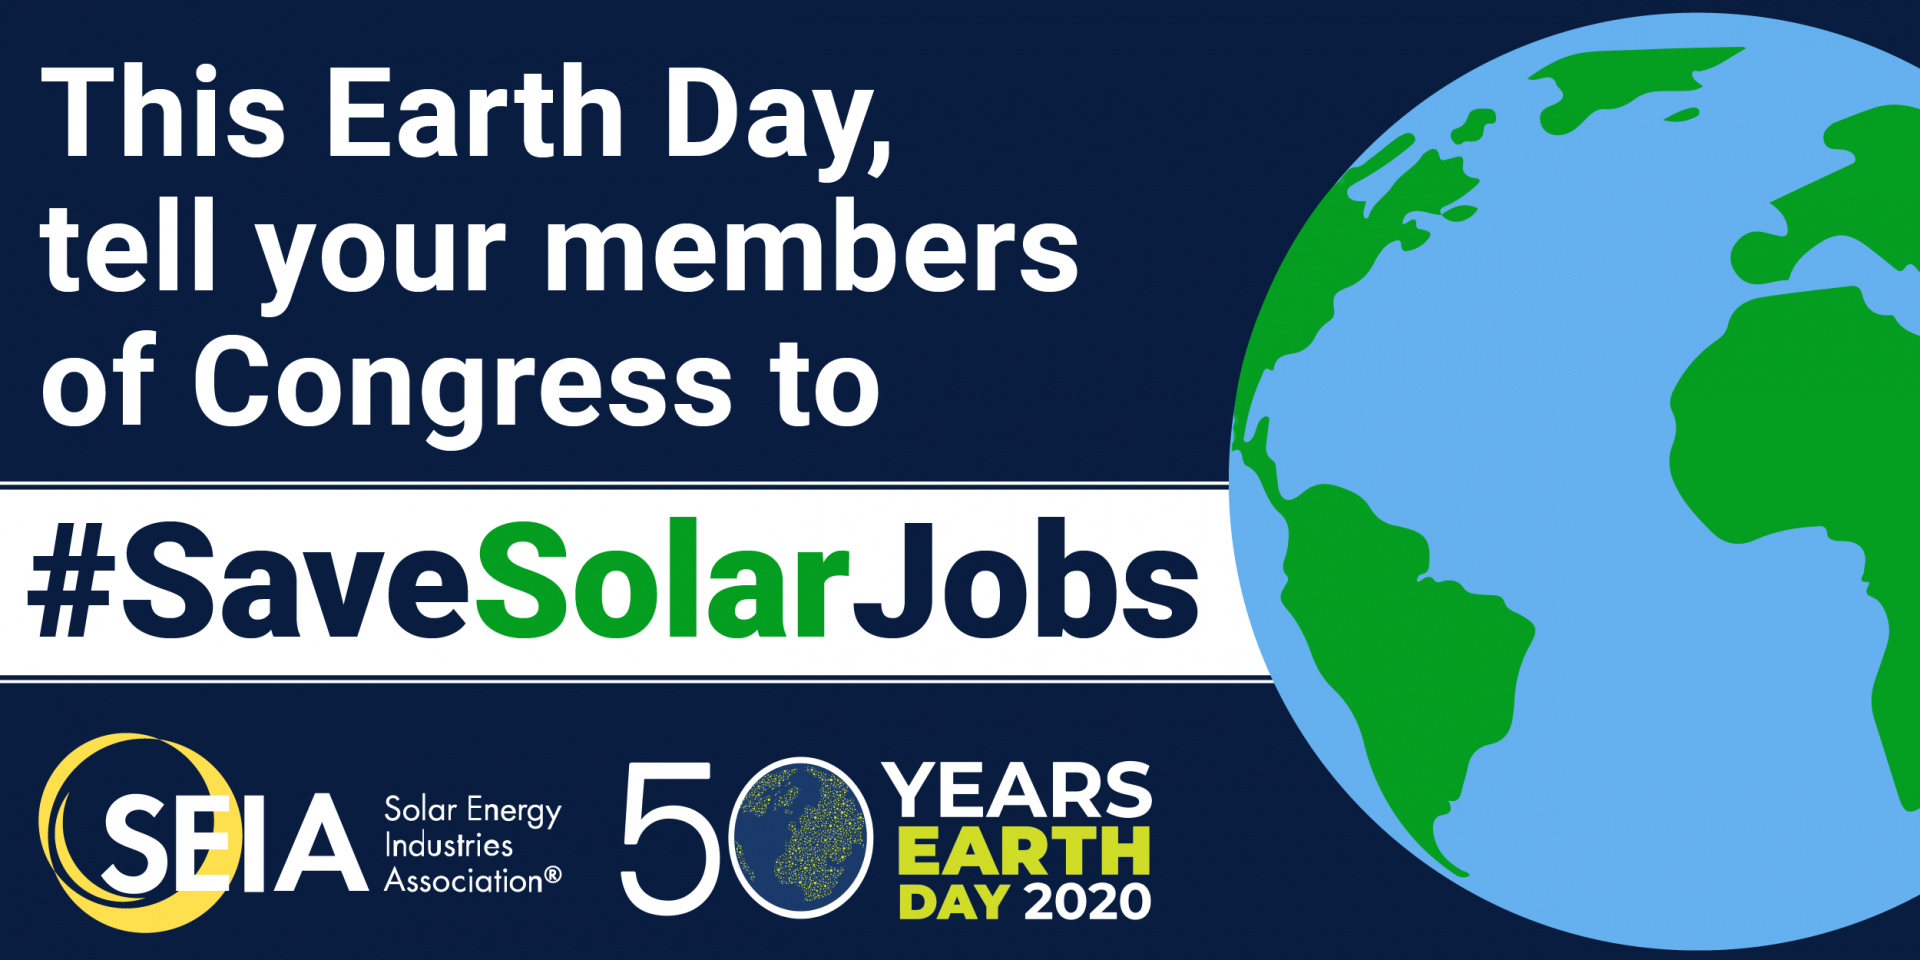 This earth day, save solar jobs